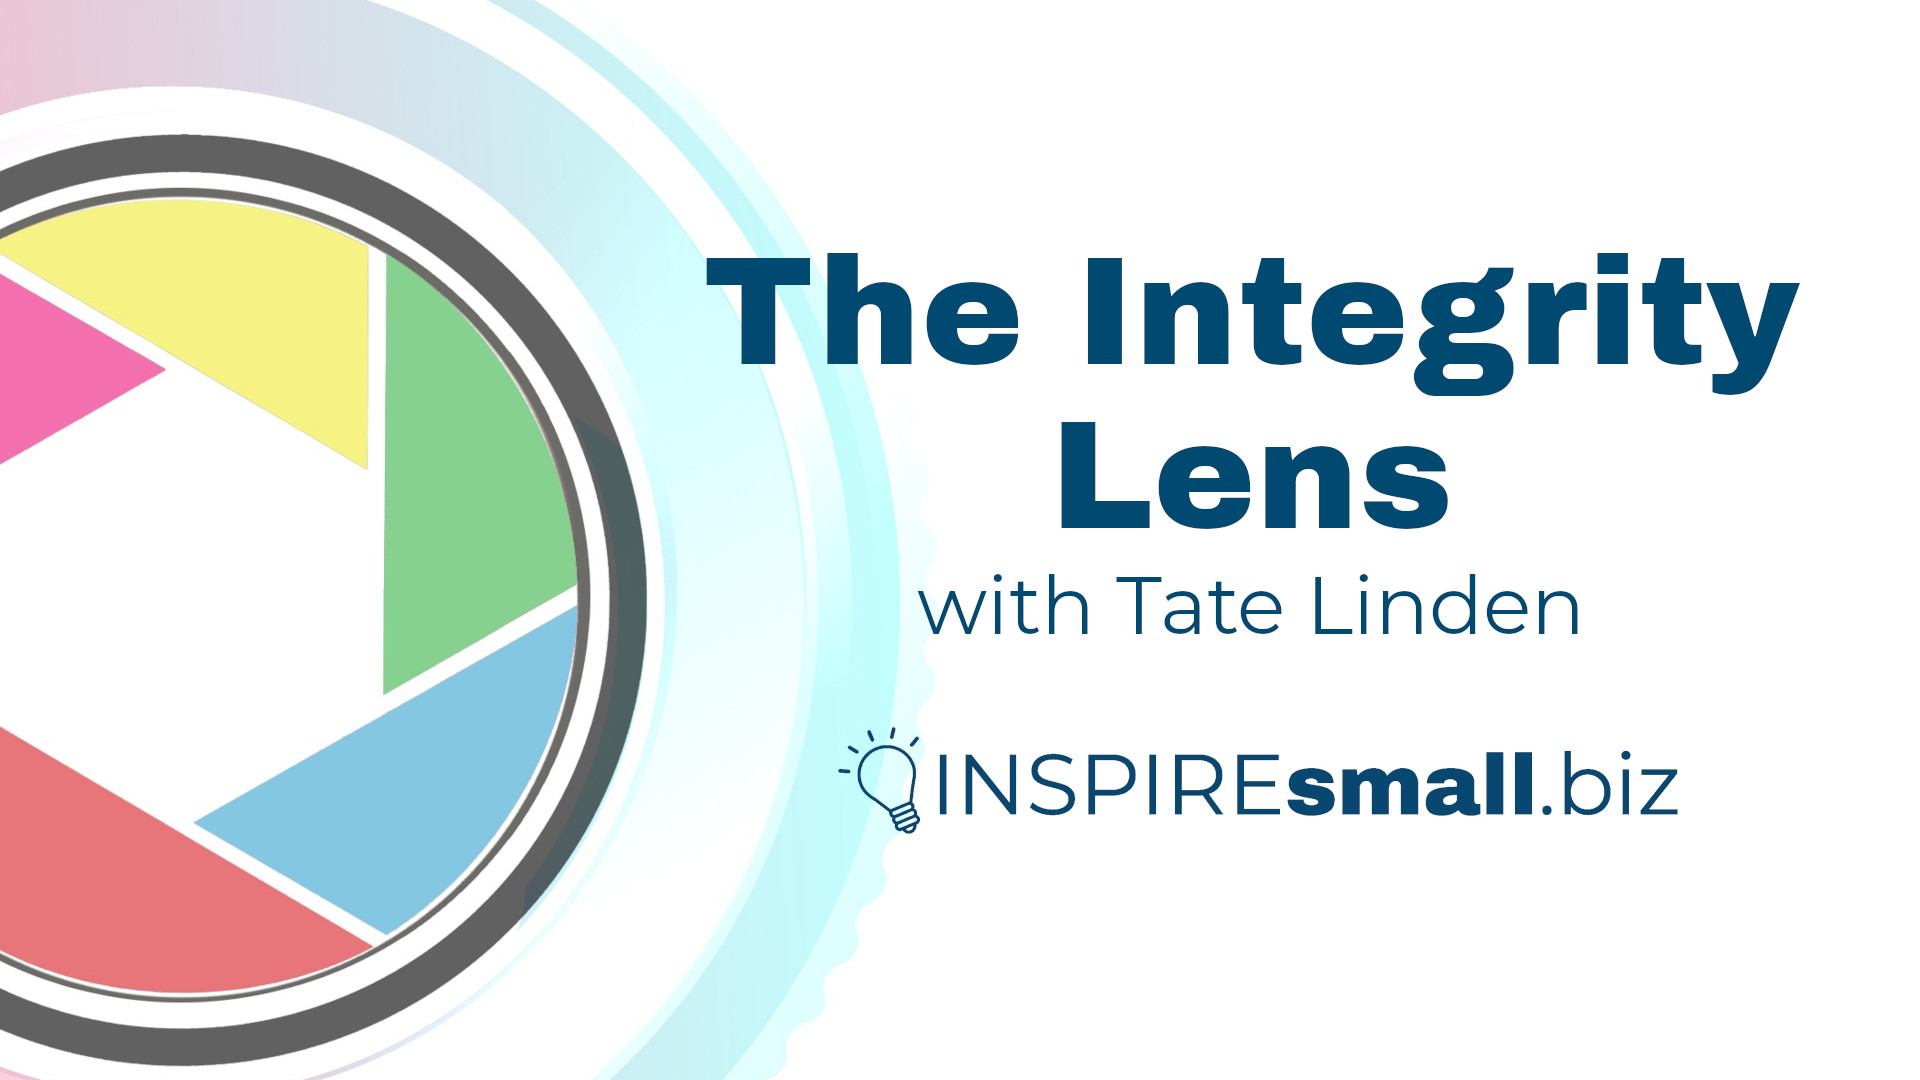 Viewing Your Businesses Through ‘The Integrity Lens’ with Tate Linden